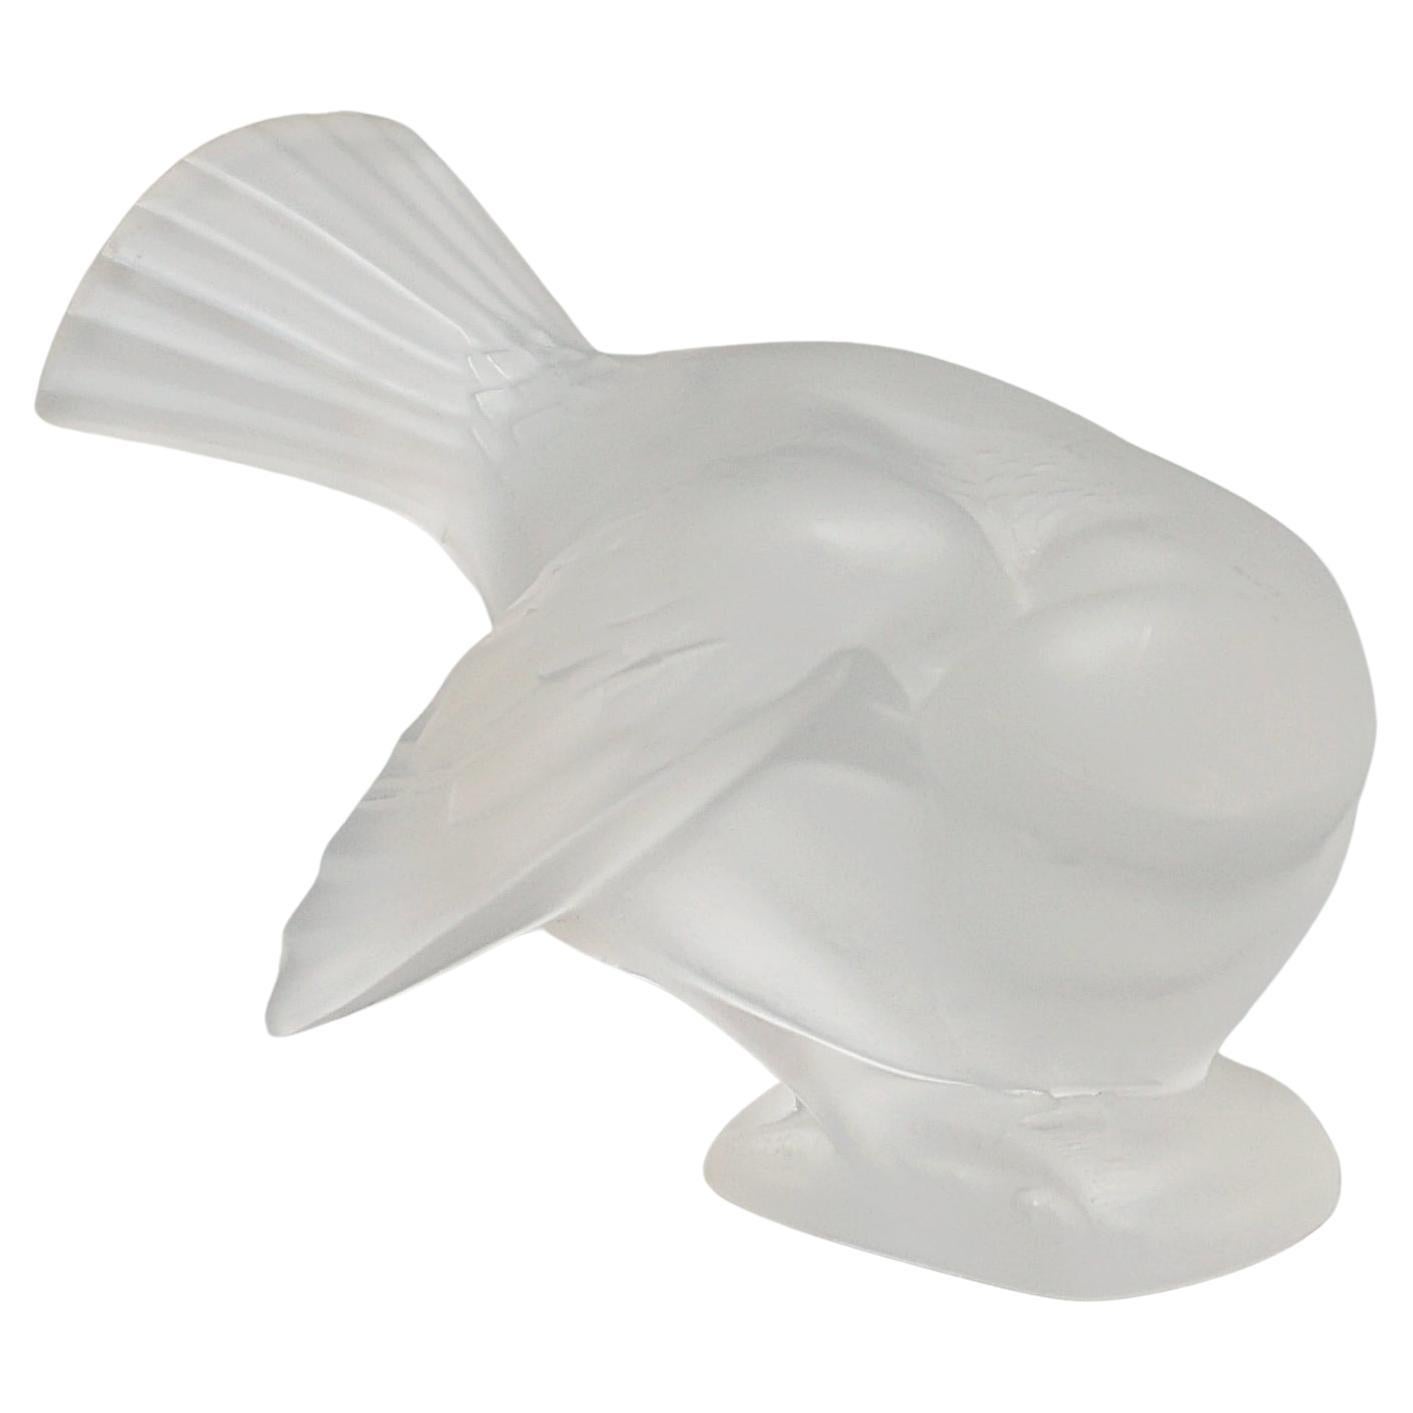 'Moineau Coquet' A Glass Bird Paperweight by Marc Lalique (1900 - 1977)